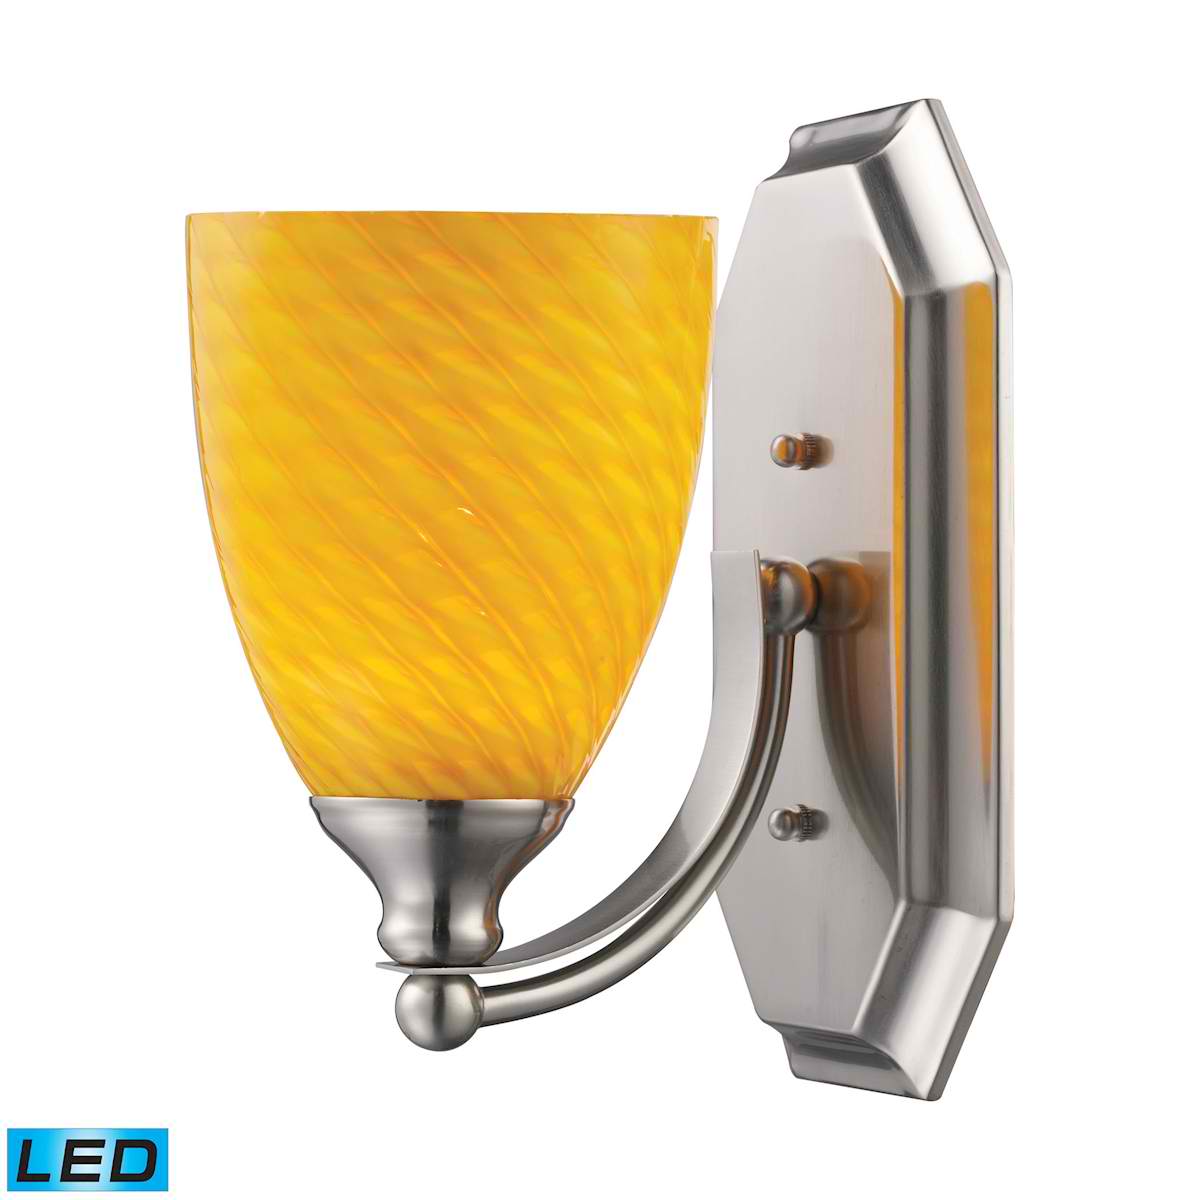 1 Light Vanity in Satin Nickel and Canary Glass - LED Offering Up To 800 Lumens (60 Watt Equivalent)